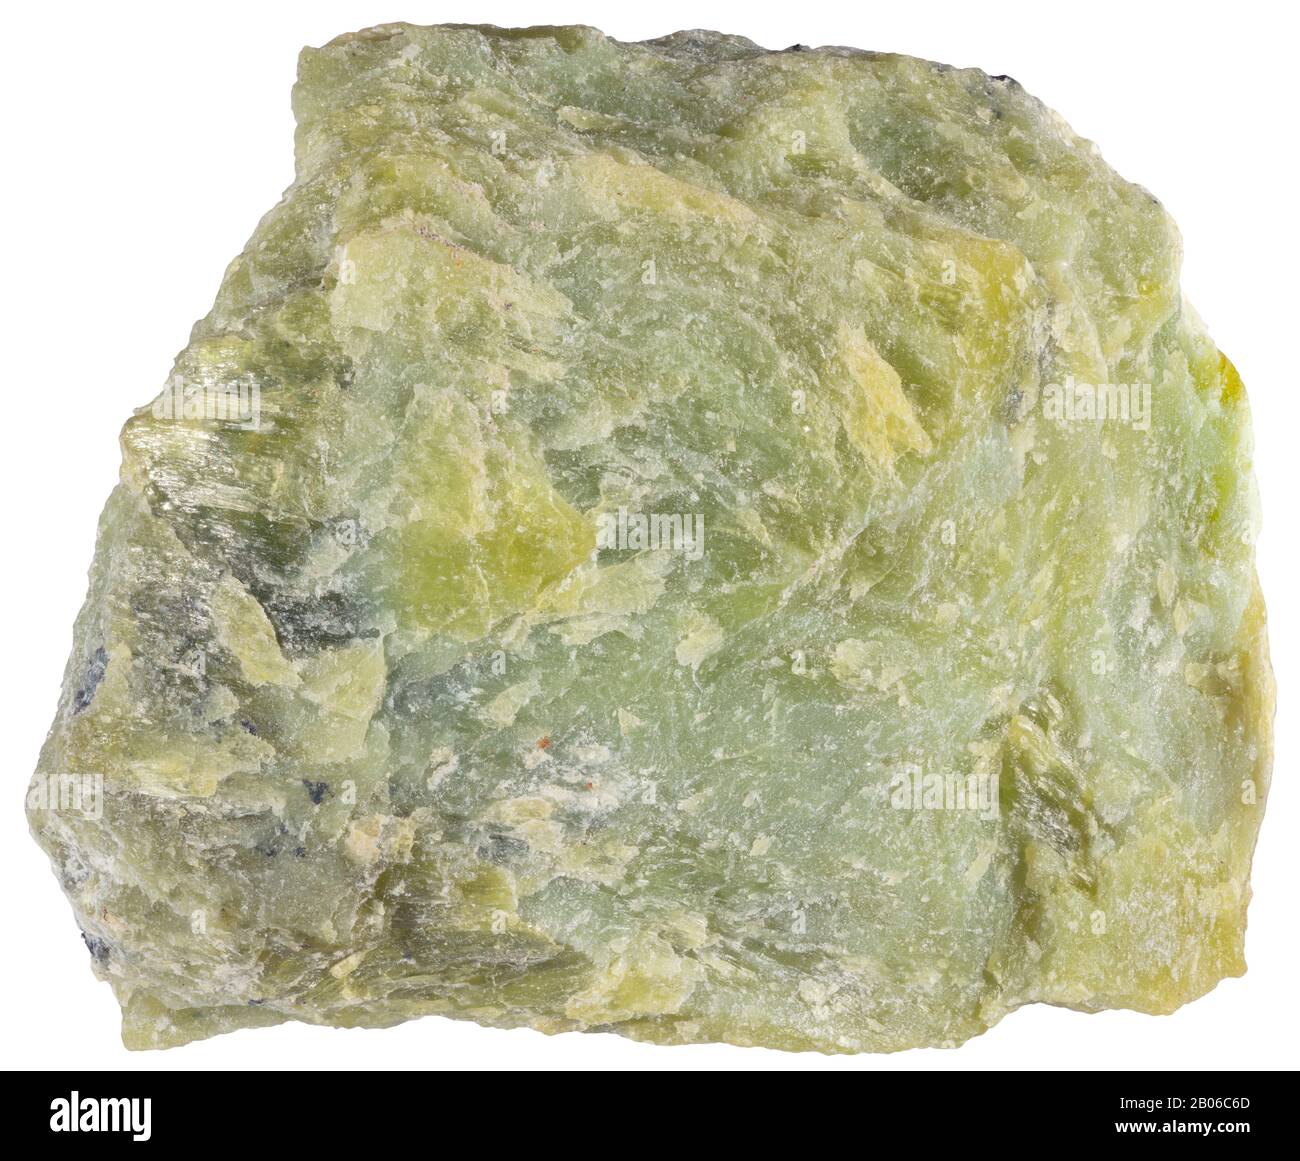 Greenlandite, Greenland Greenlandite is a mix of compacted grains of Quartz (silicon dioxide) known as Quartzite and green Fuchsite, a chromium based Stock Photo